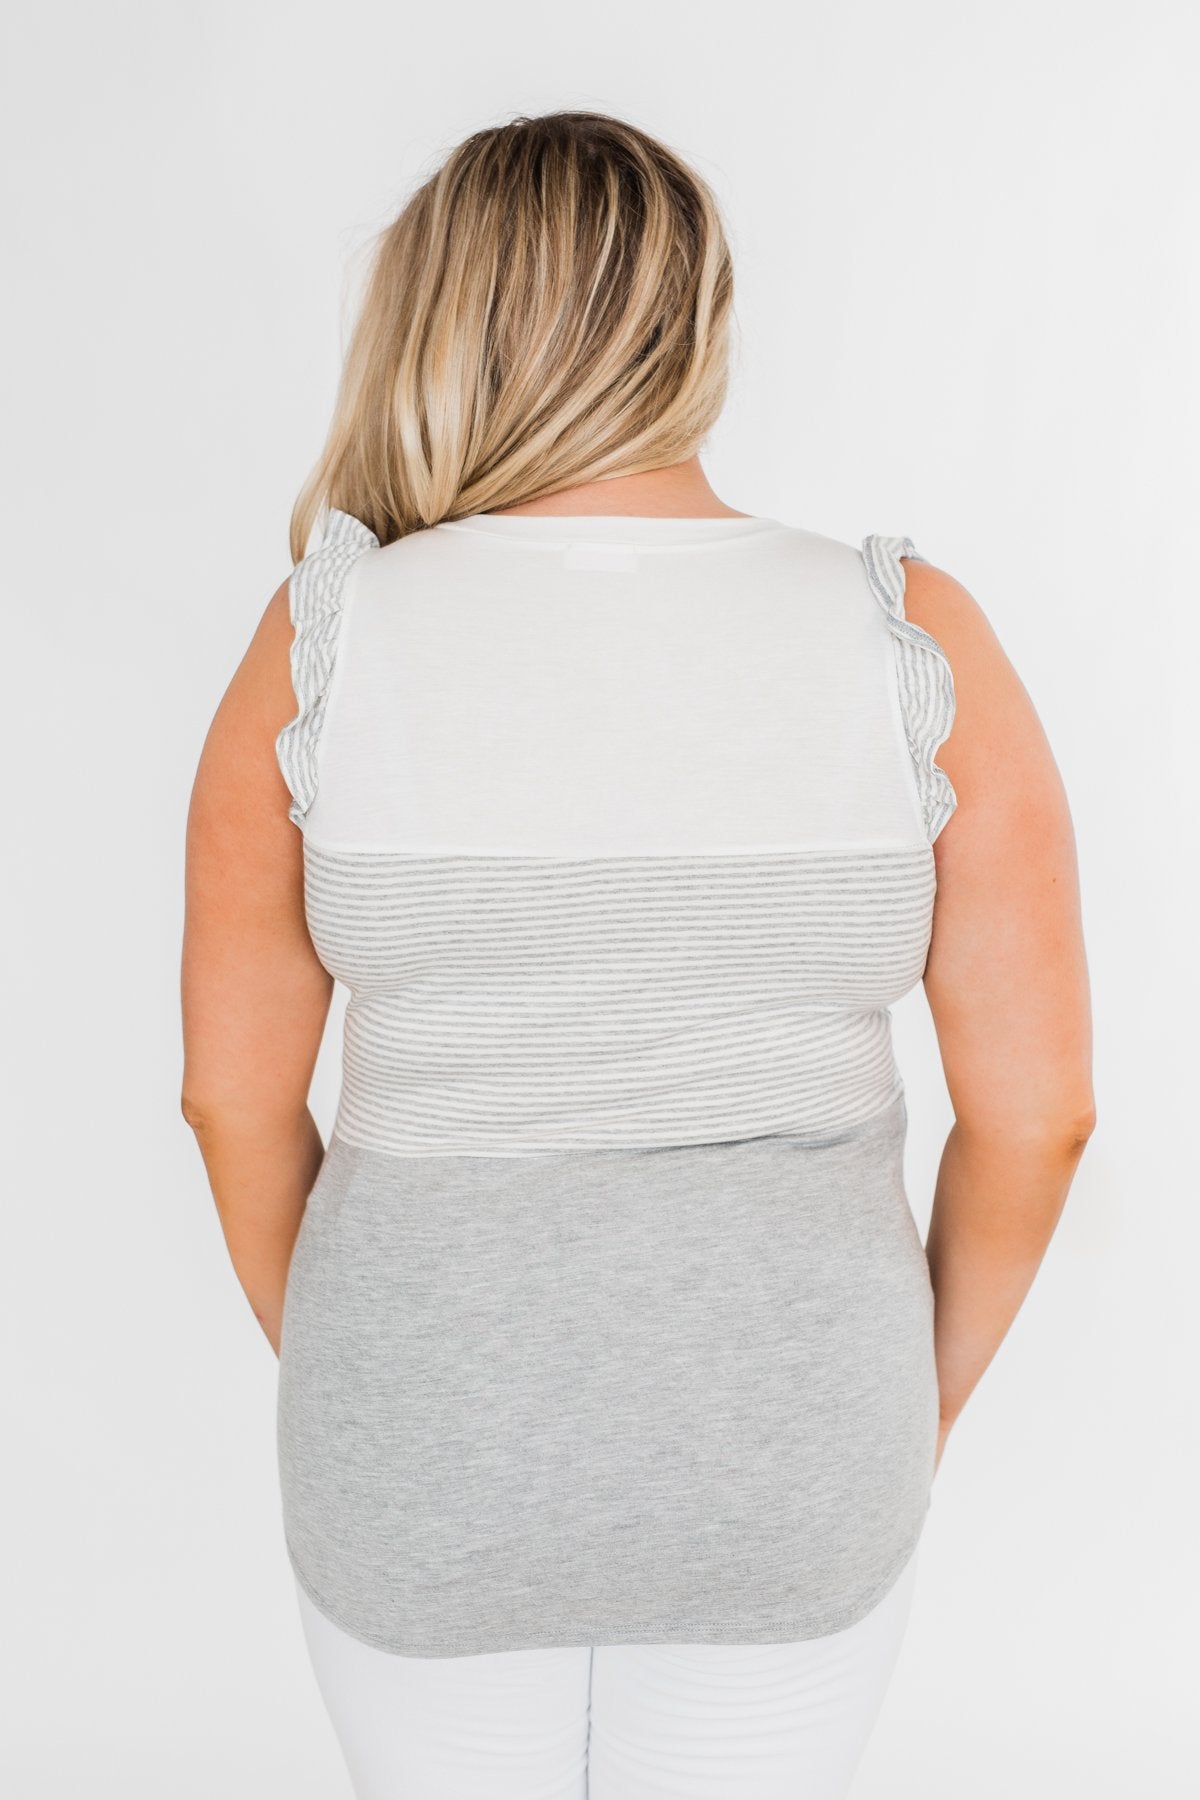 The Sweetest Thing Color Block Tank Top- Grey